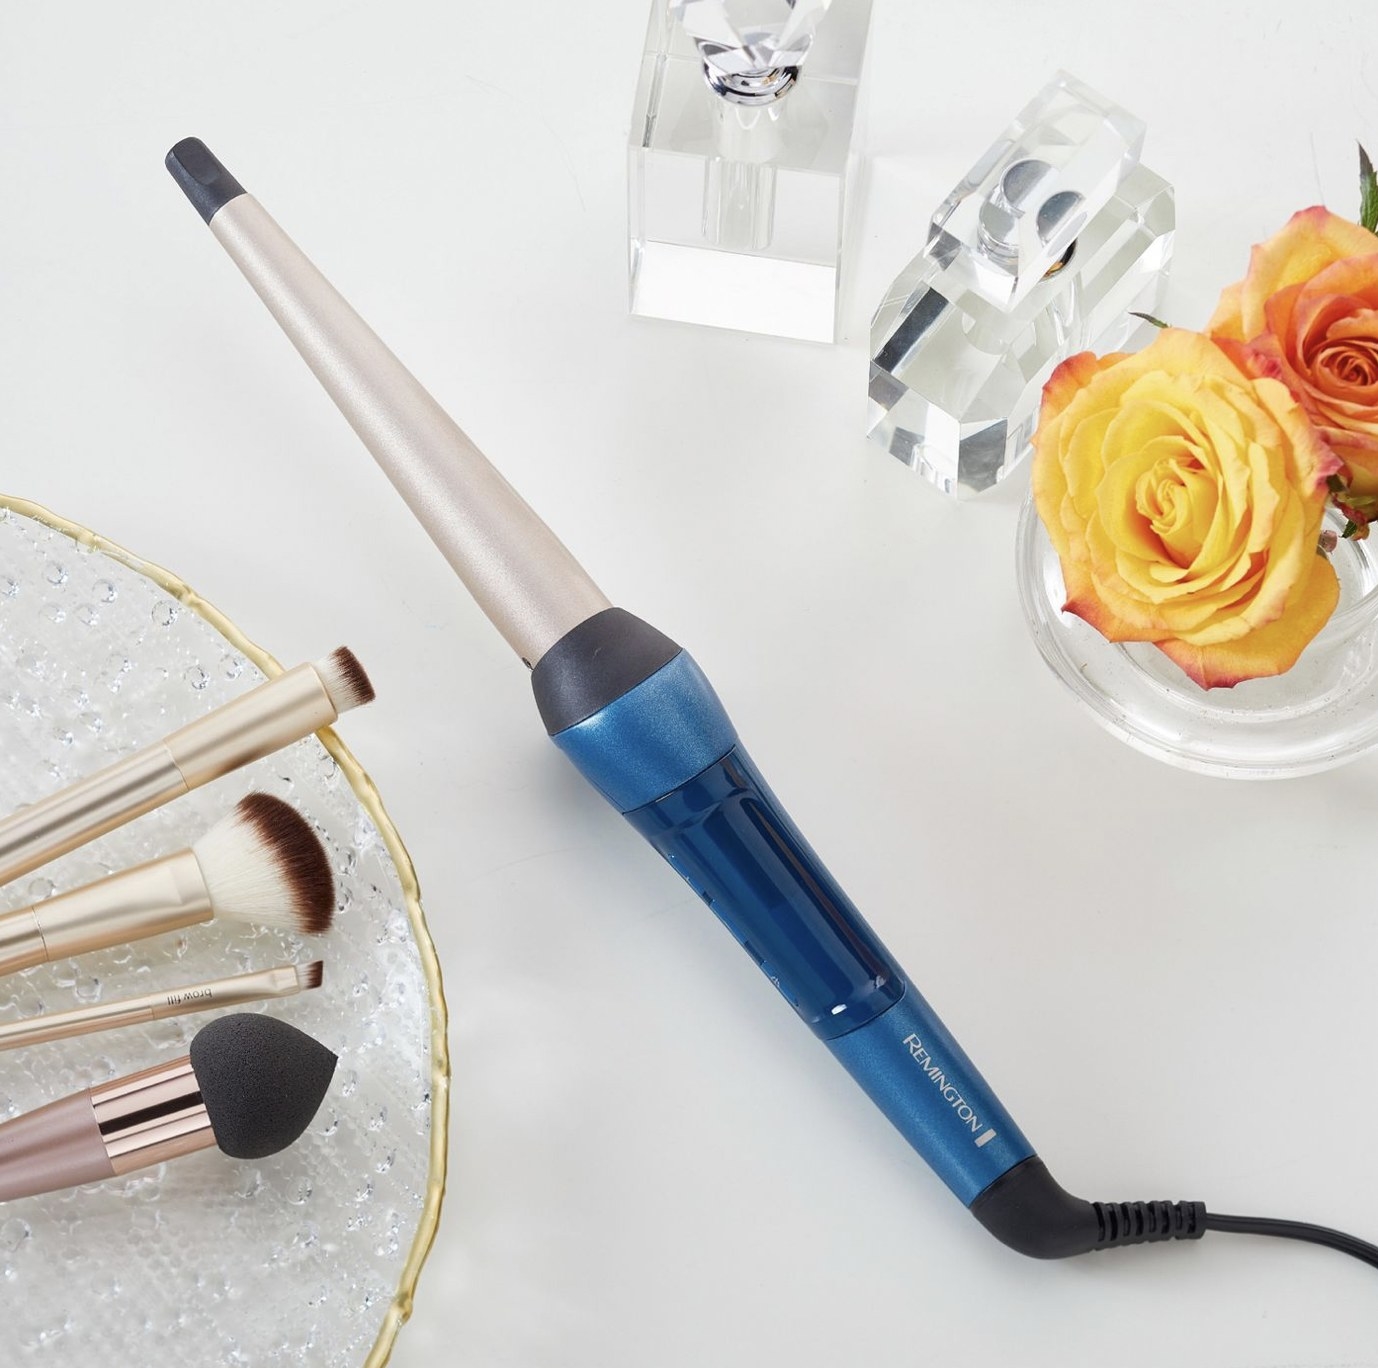 A blue curling wand, makeup brushes, and flowers